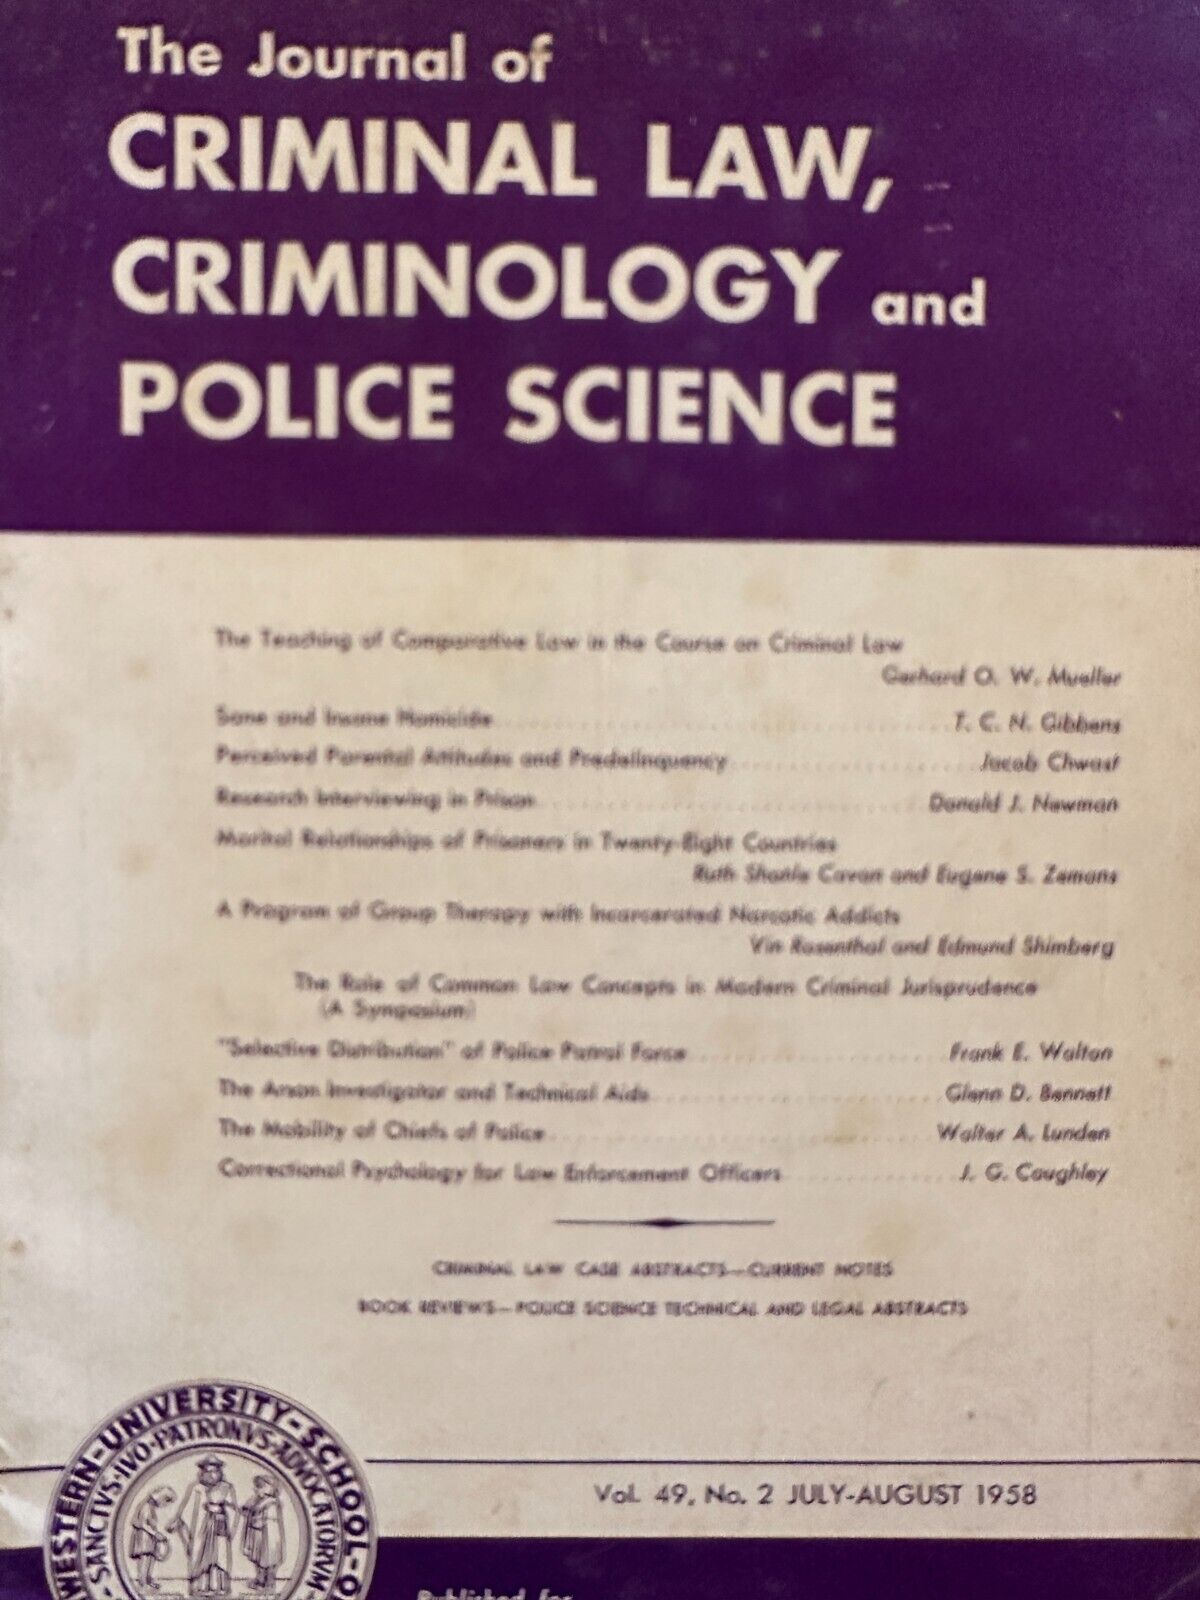 Journal of Criminal Law, Criminology, and Police Science July / August 1958